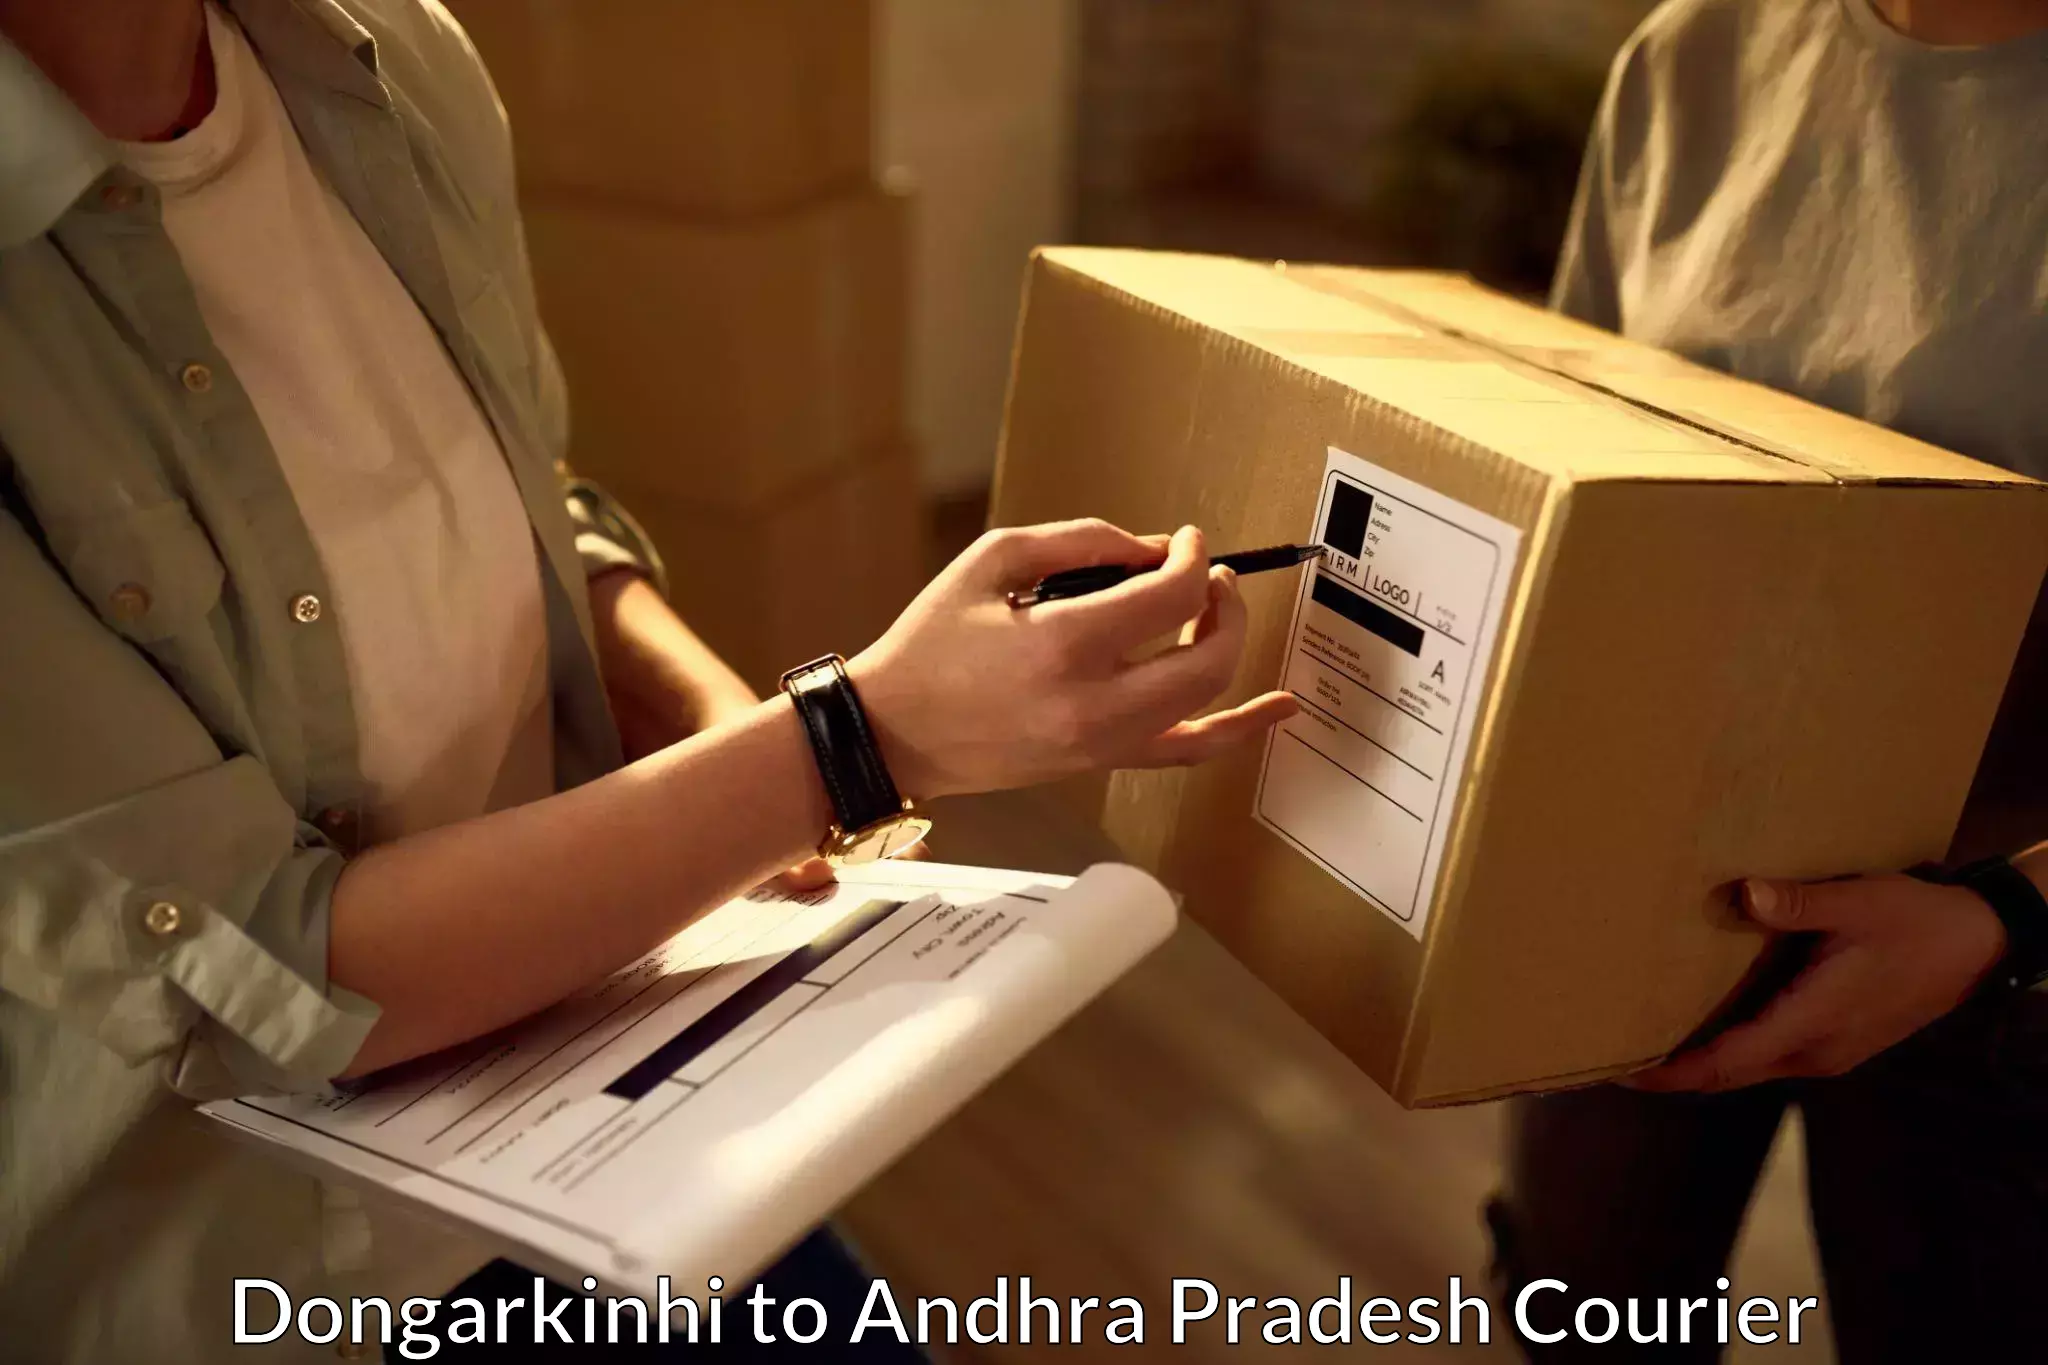 Parcel service for businesses Dongarkinhi to Andhra Pradesh